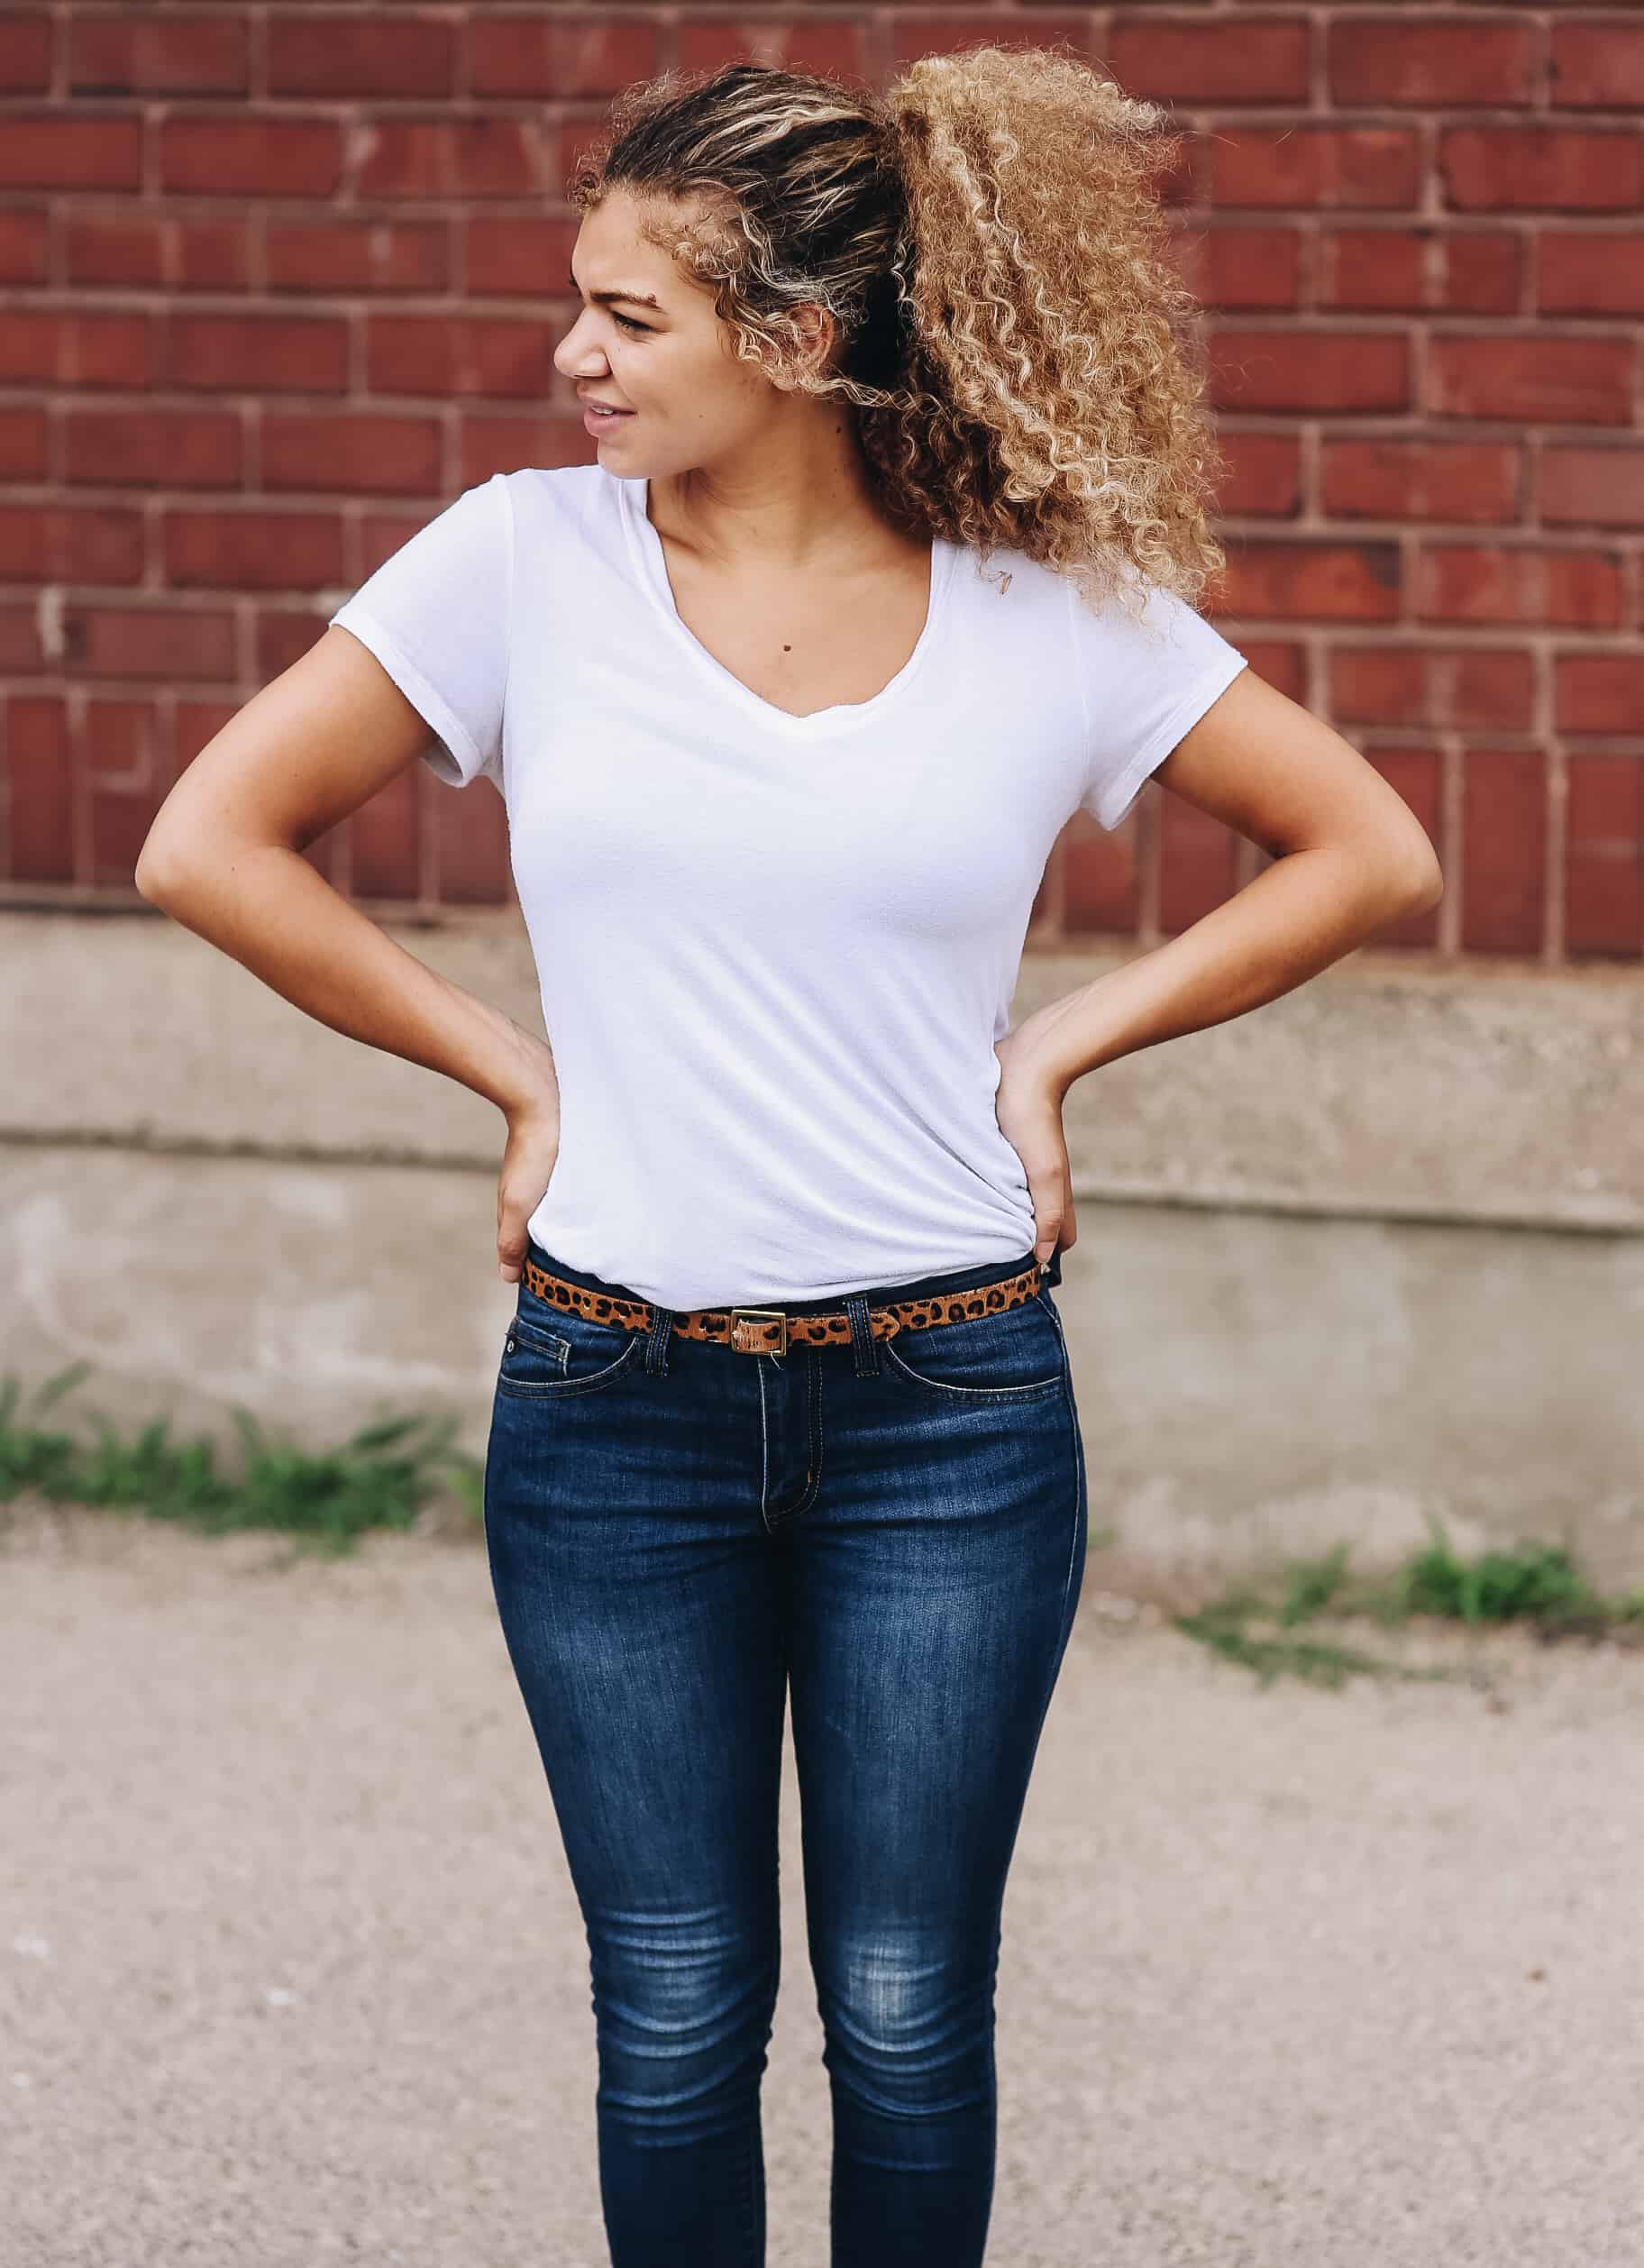 elevate a simple tee and jeans outfit